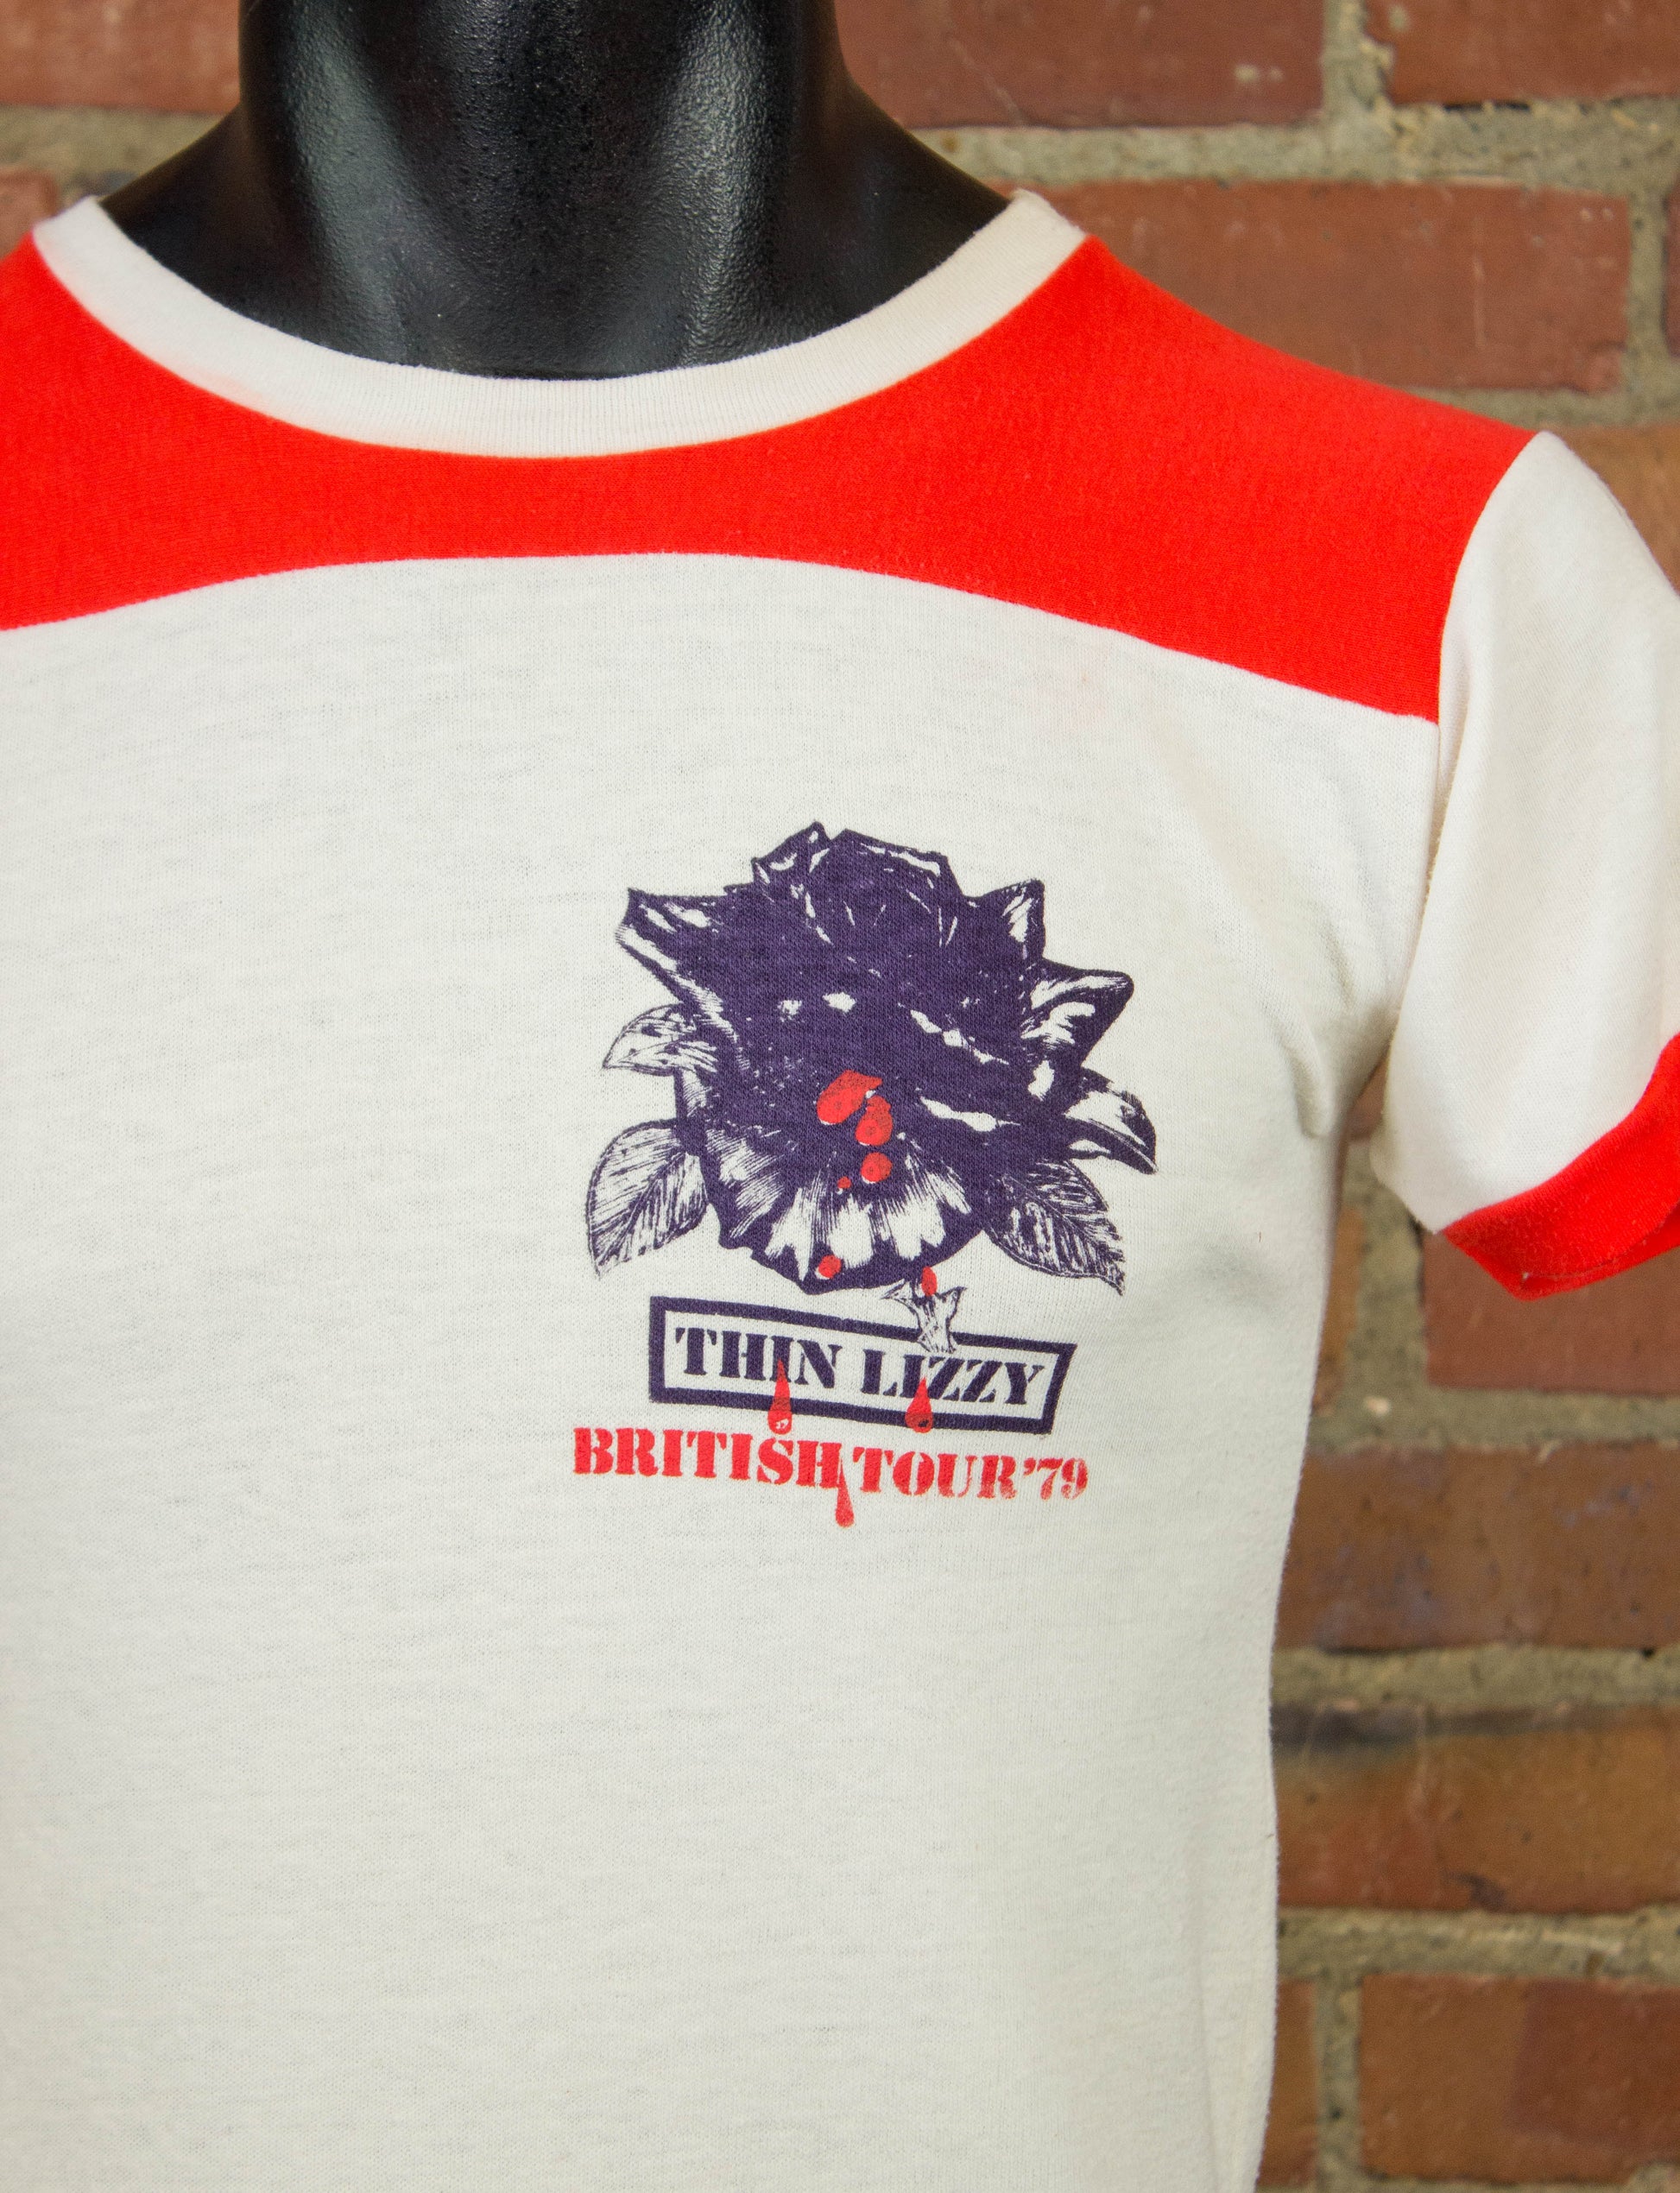 Vintage Thin Lizzy Concert T Shirt 1979 Black Rose British Tour White and Red Ringer Small